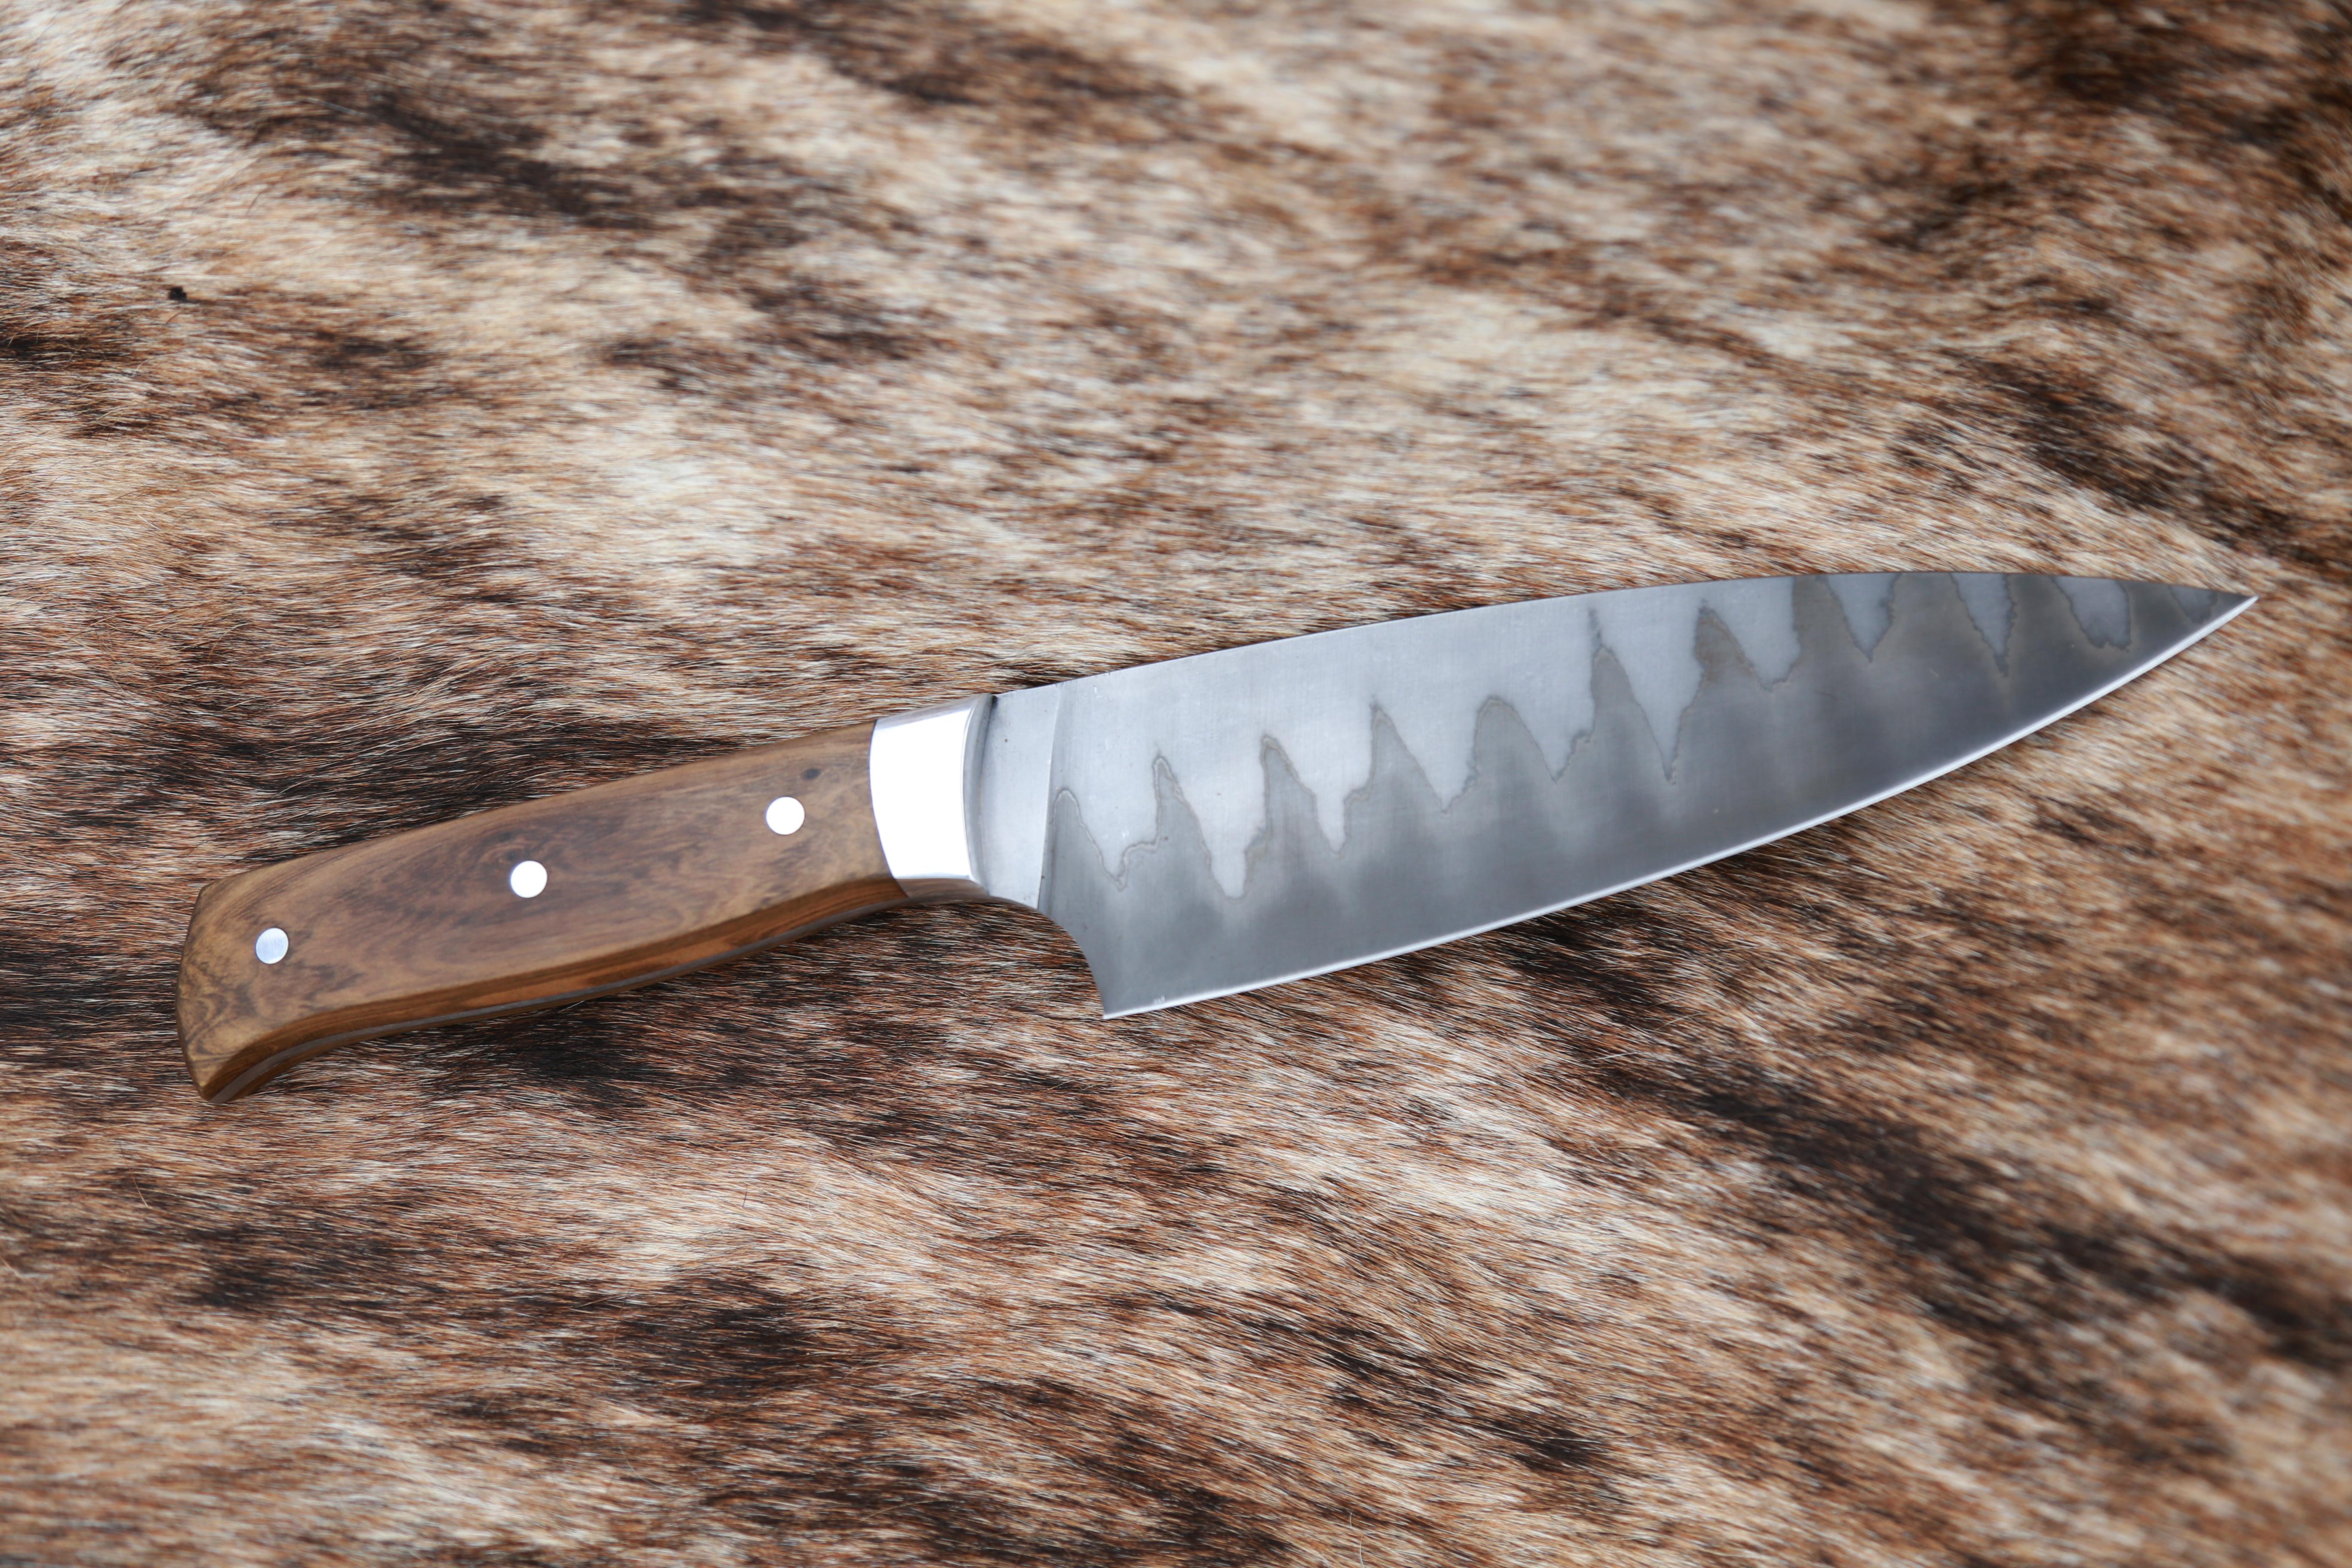 Customizable forged culinary San Mai Steel Knife from Costantini Design.

This handmade knife is available as shown or with a Damascus blade, and the handle is available in various woods, inquire for details. 

About Costantini Design